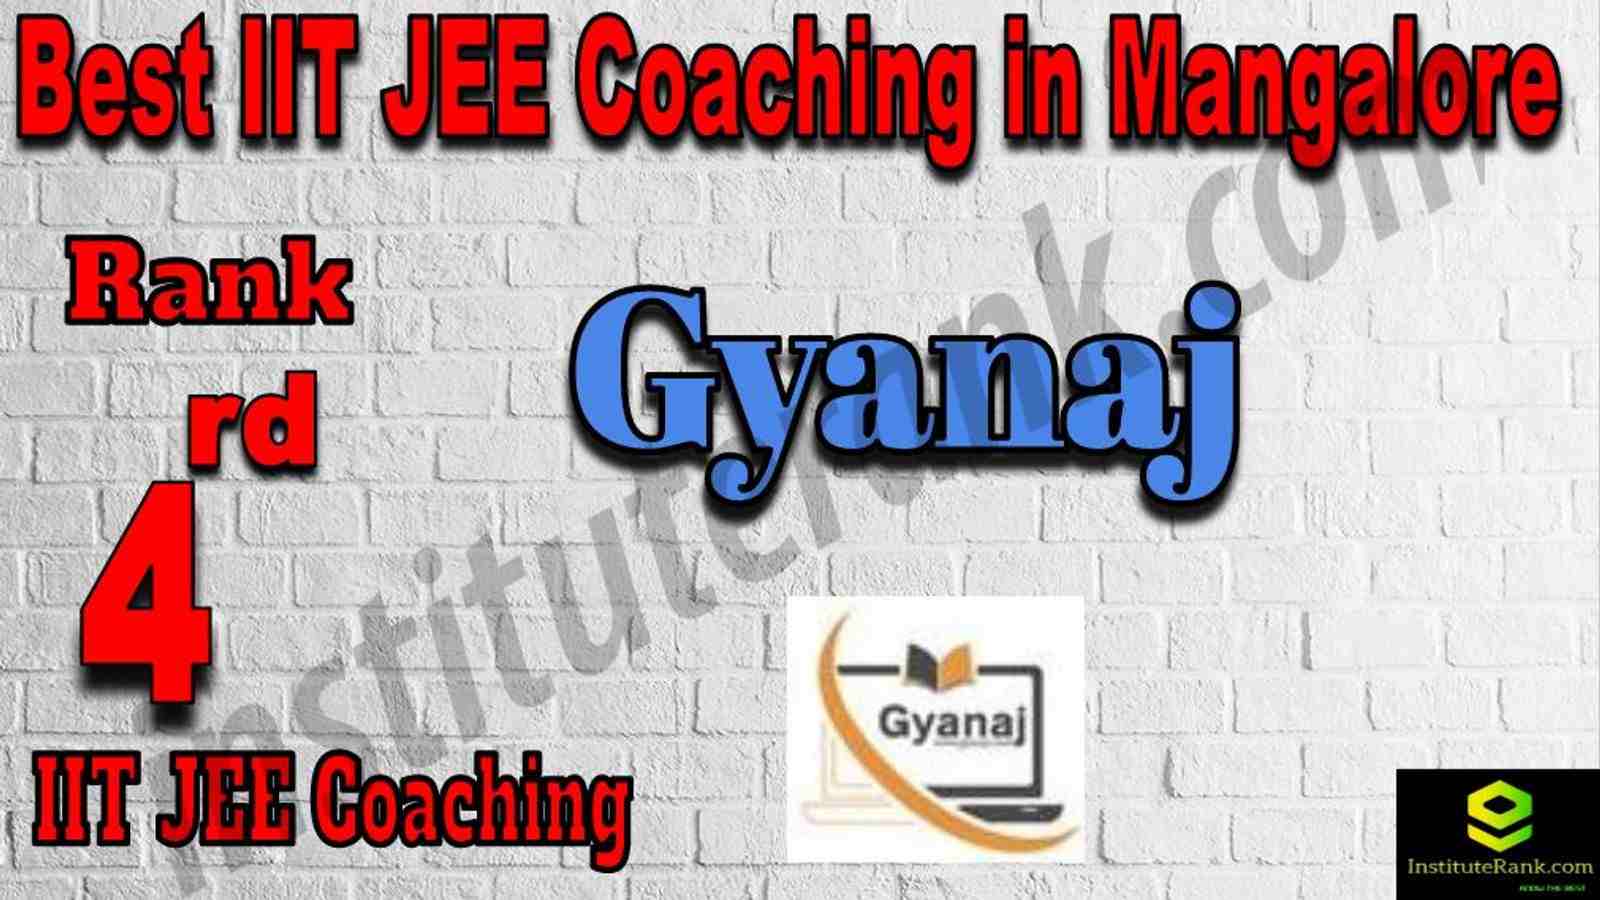 4th Best IIT JEE Coaching in Mangalore